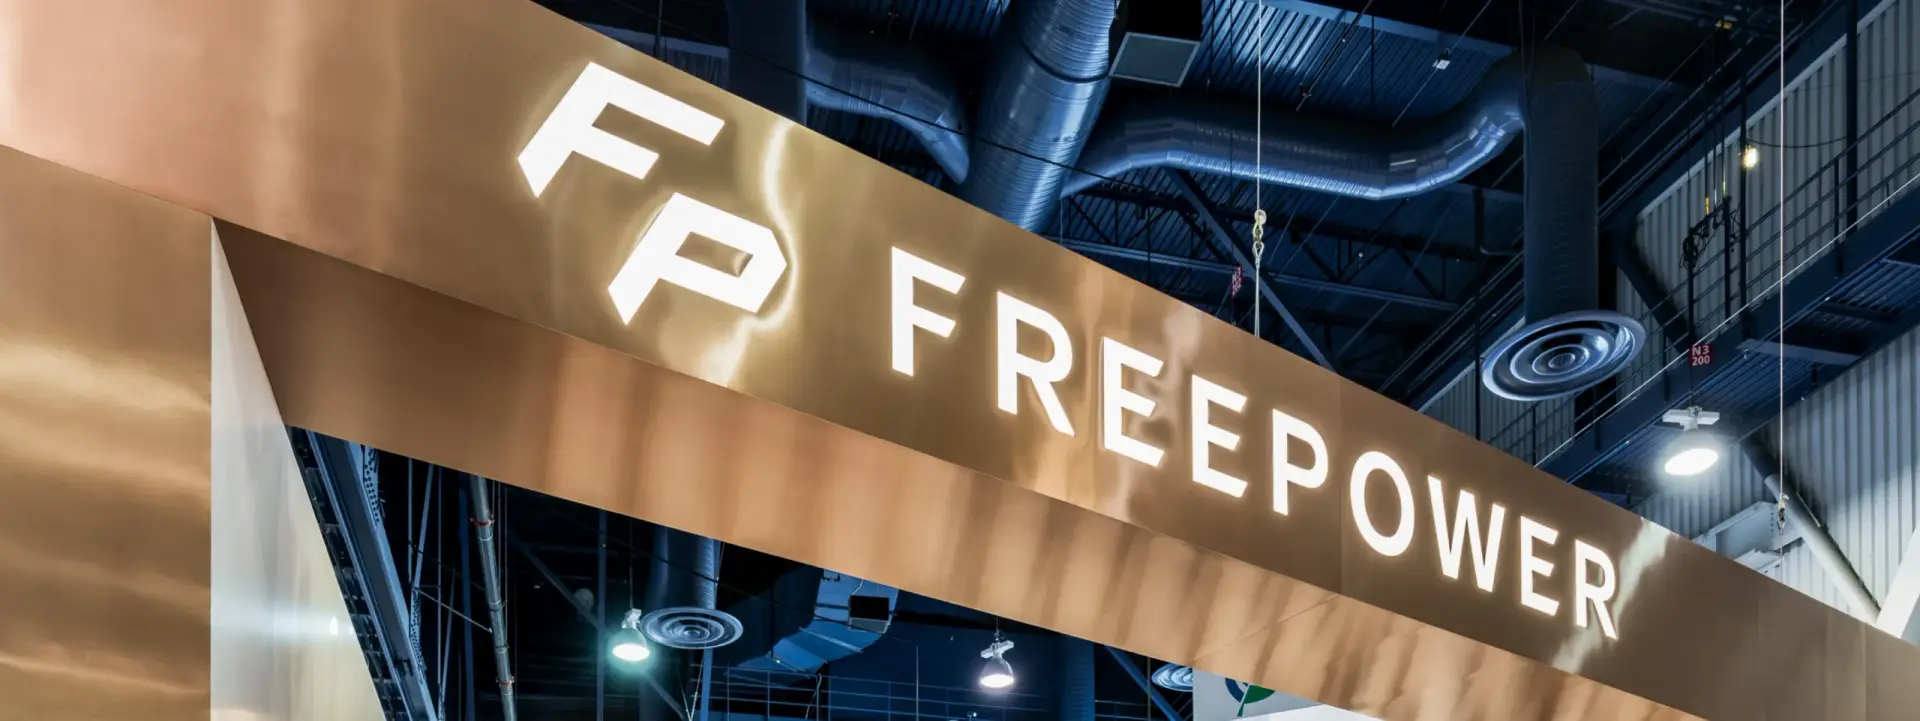 Revamped Freepower booth design showcased at HD Expo.